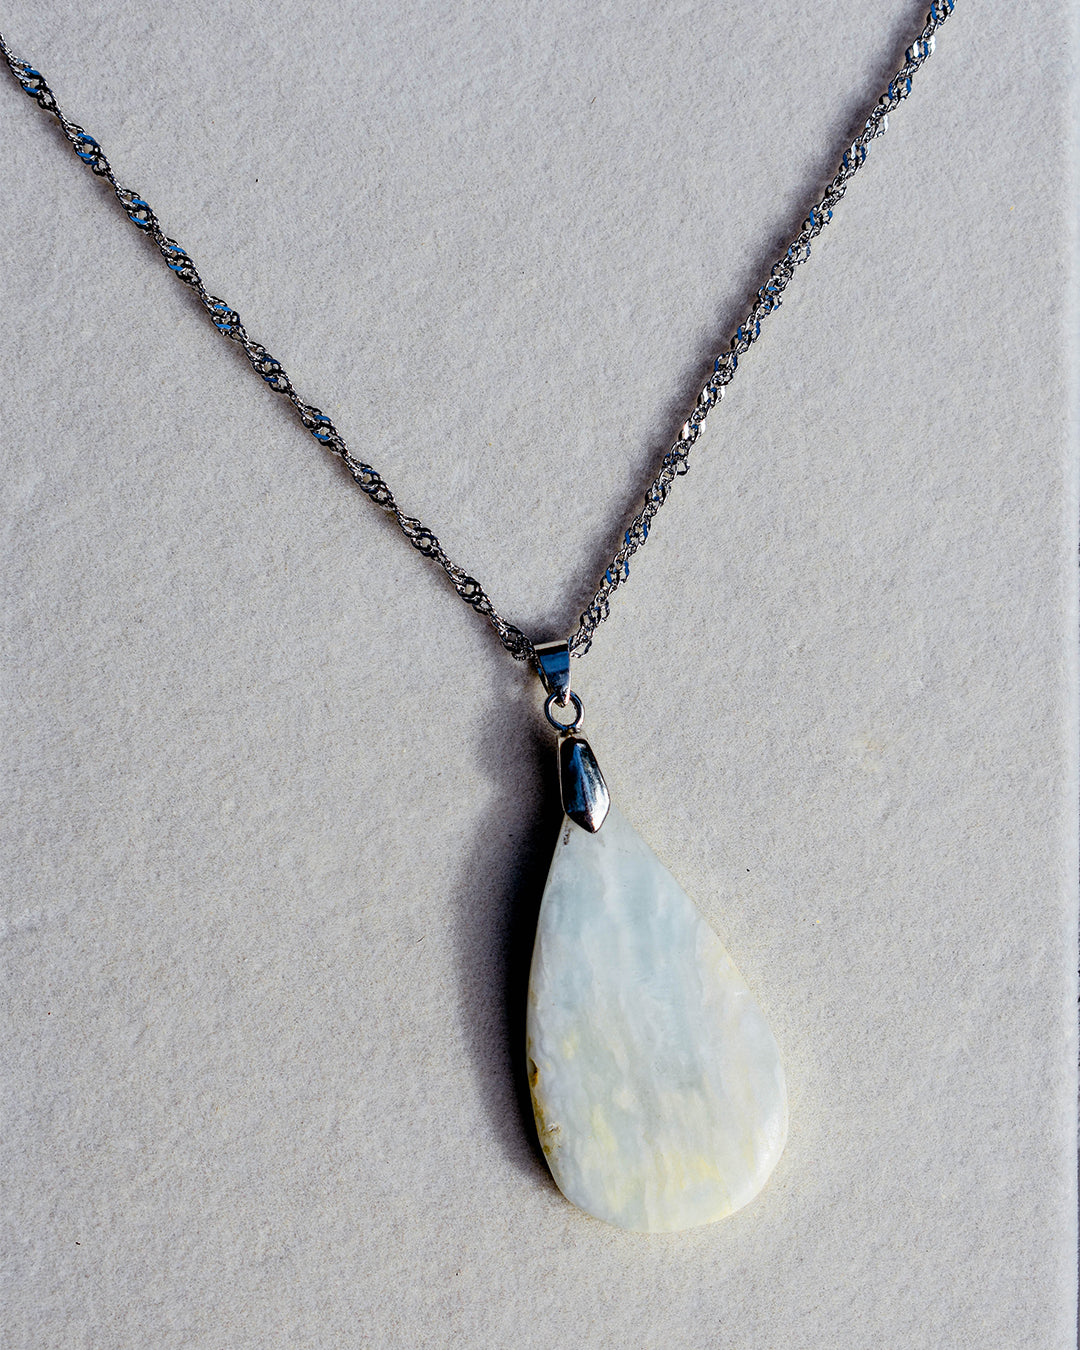 Stainless Steel chain with Caribbean Blue Calcite crystal pendant